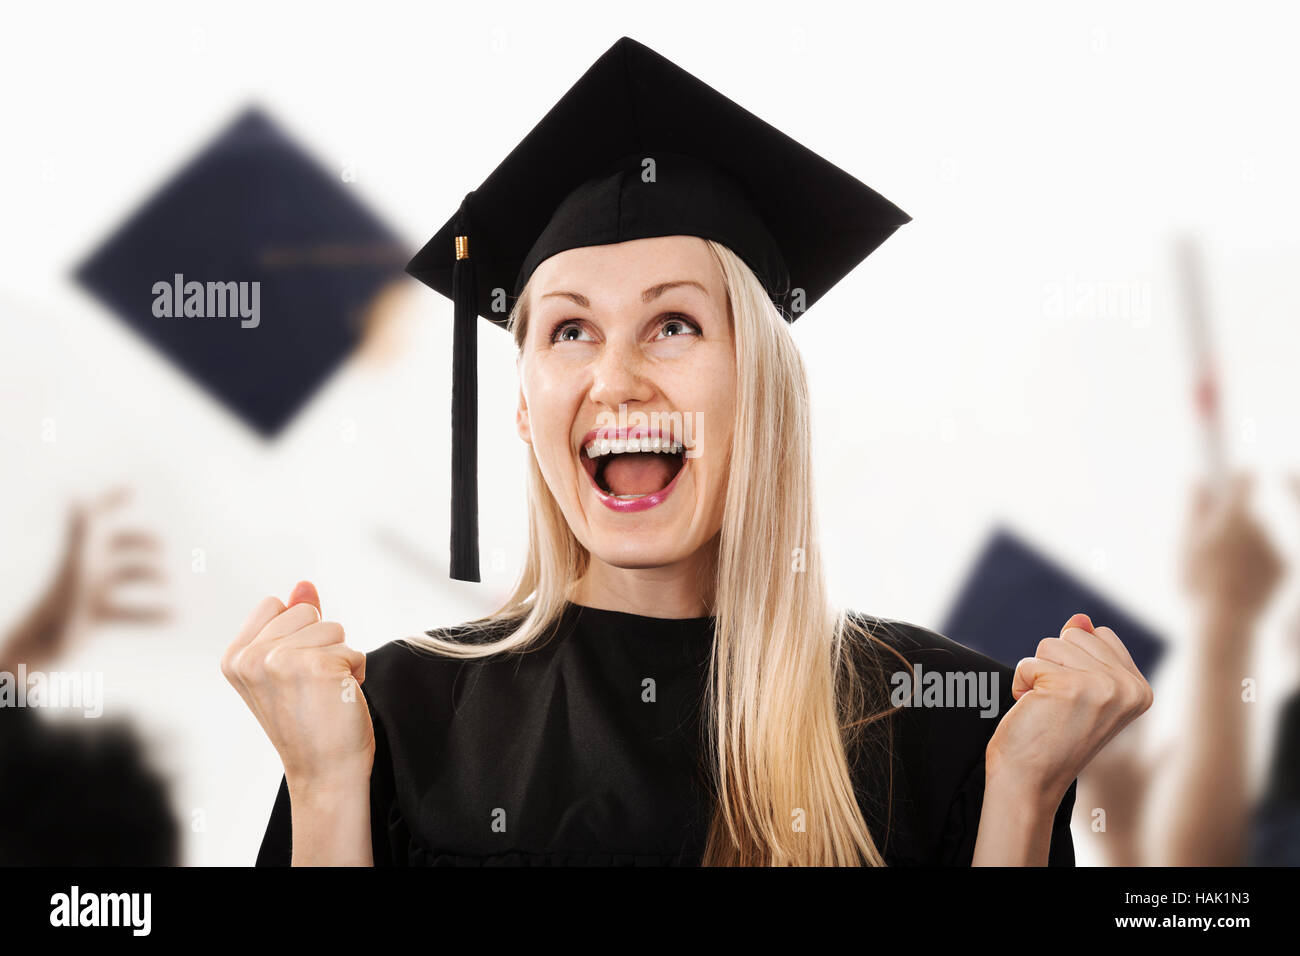 young happy college graduate wearing cap and gown Stock Photo